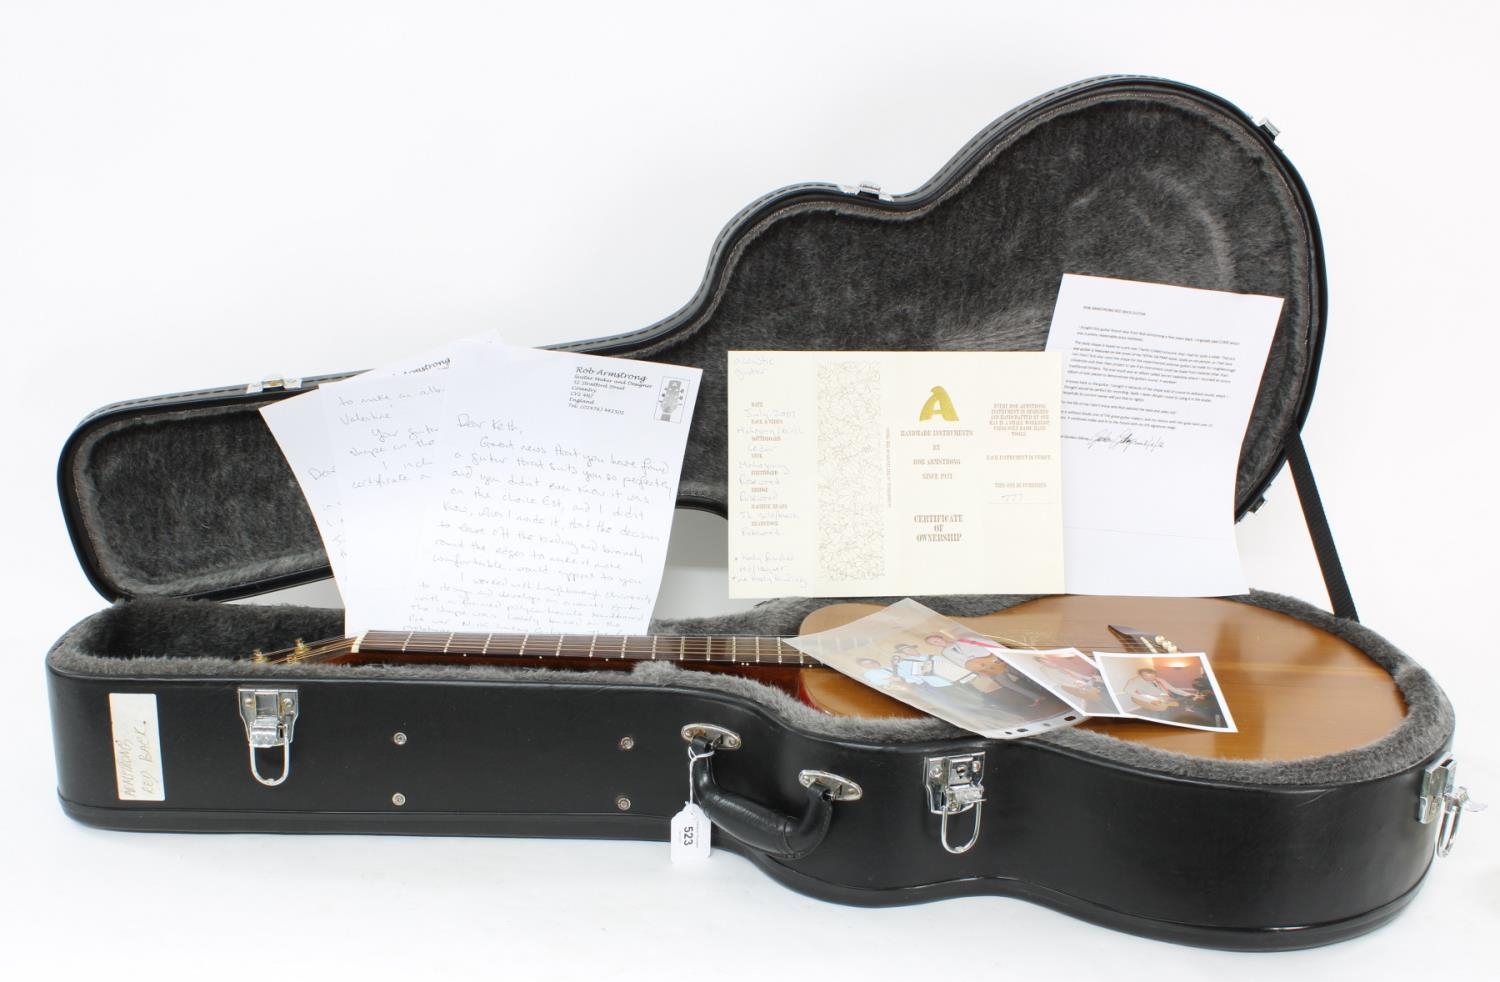 Gordon Giltrap and Steve Craddock - 2007 Rob Armstrong acoustic guitar, made in England, ser. no. - Image 3 of 3